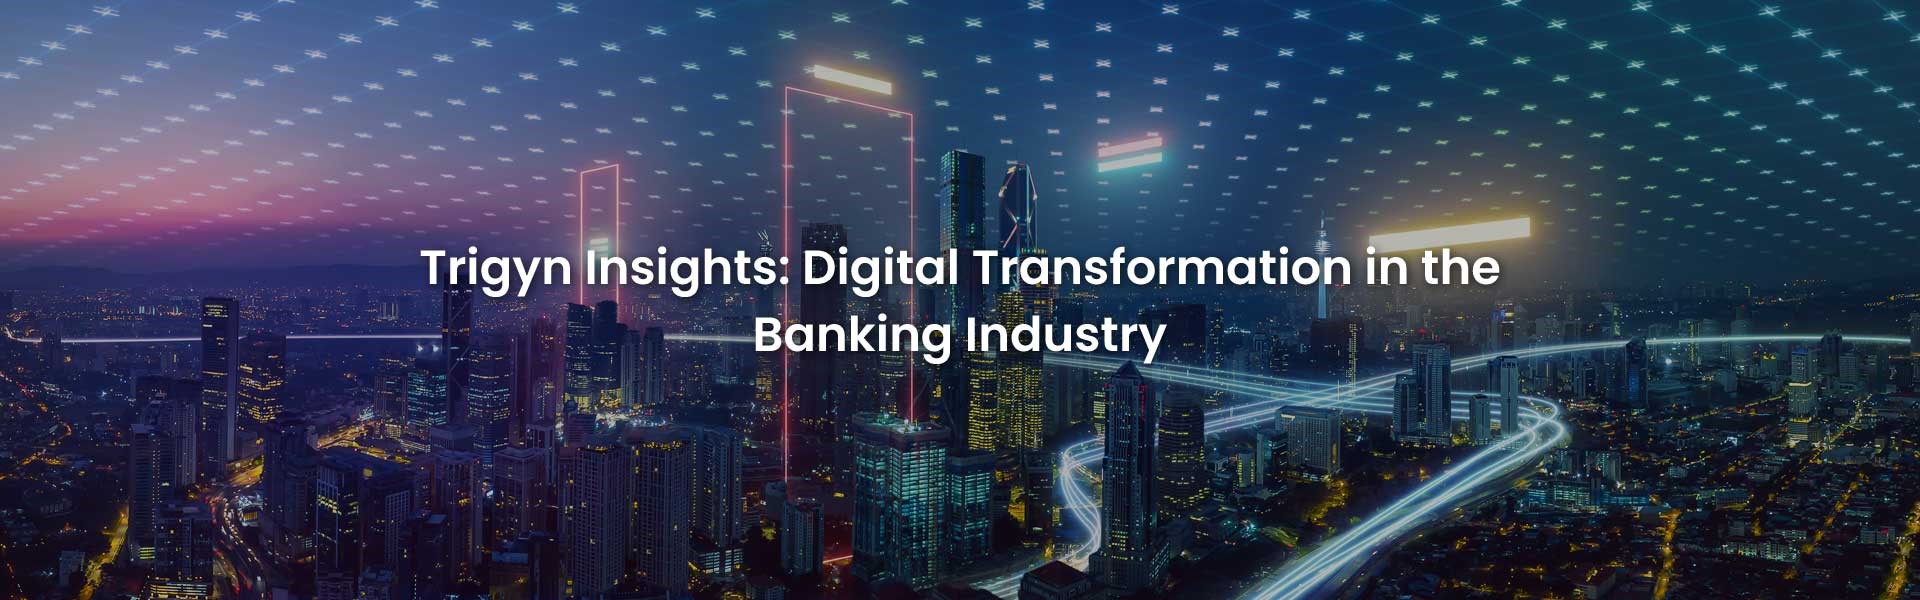 Digital Transformation in the Banking Industry